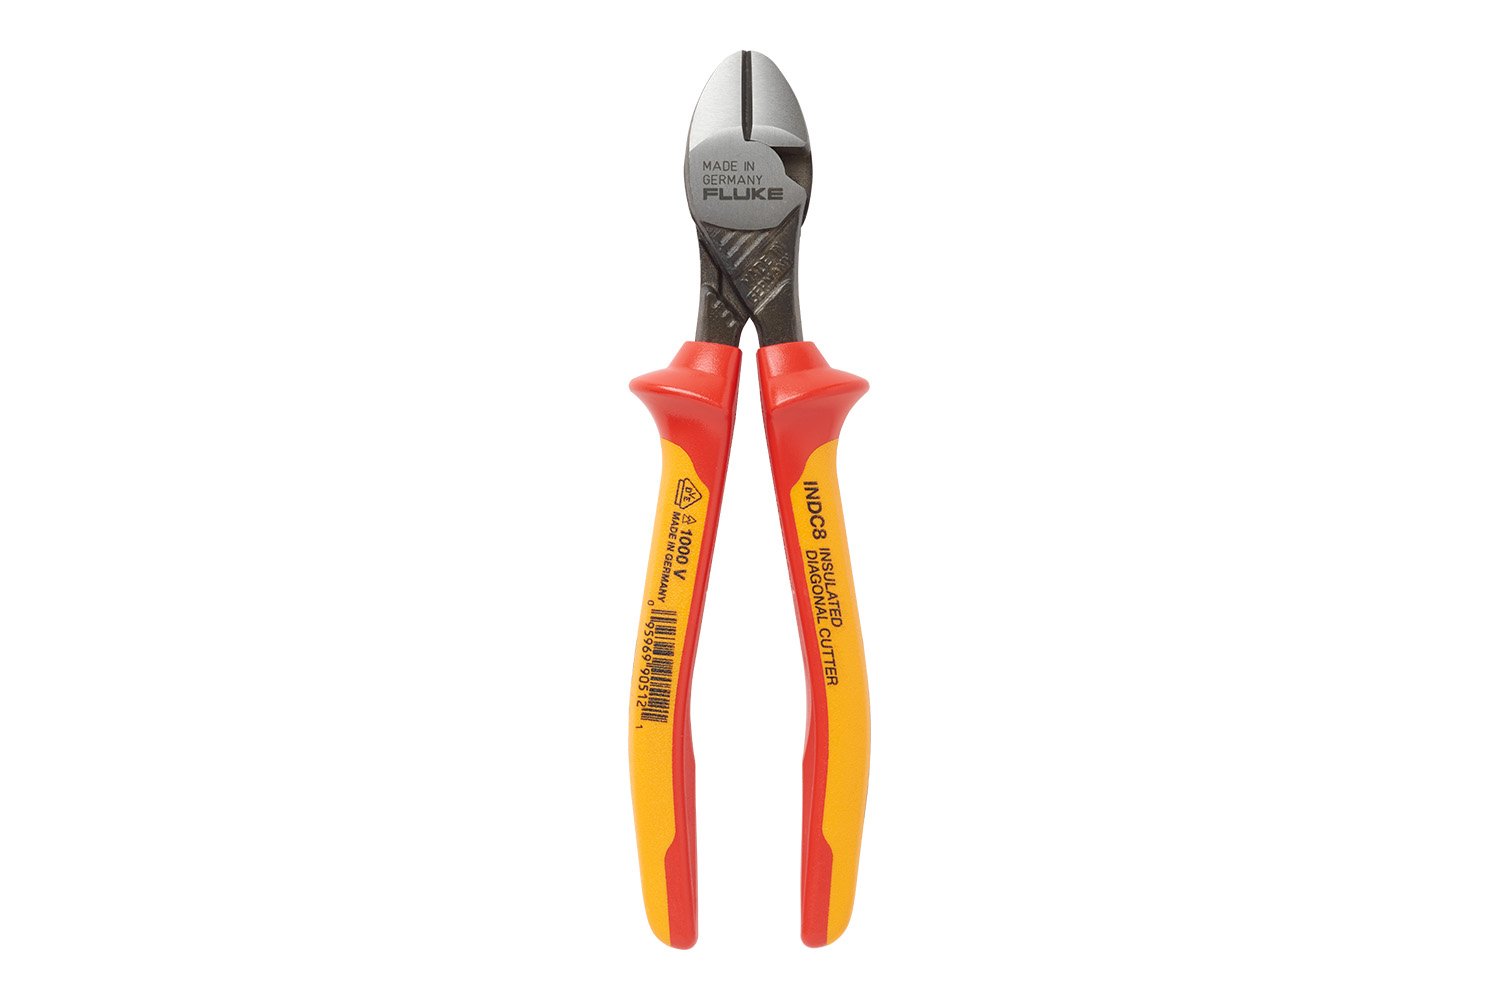 plastic cutter pliers, plastic cutter pliers Suppliers and Manufacturers at